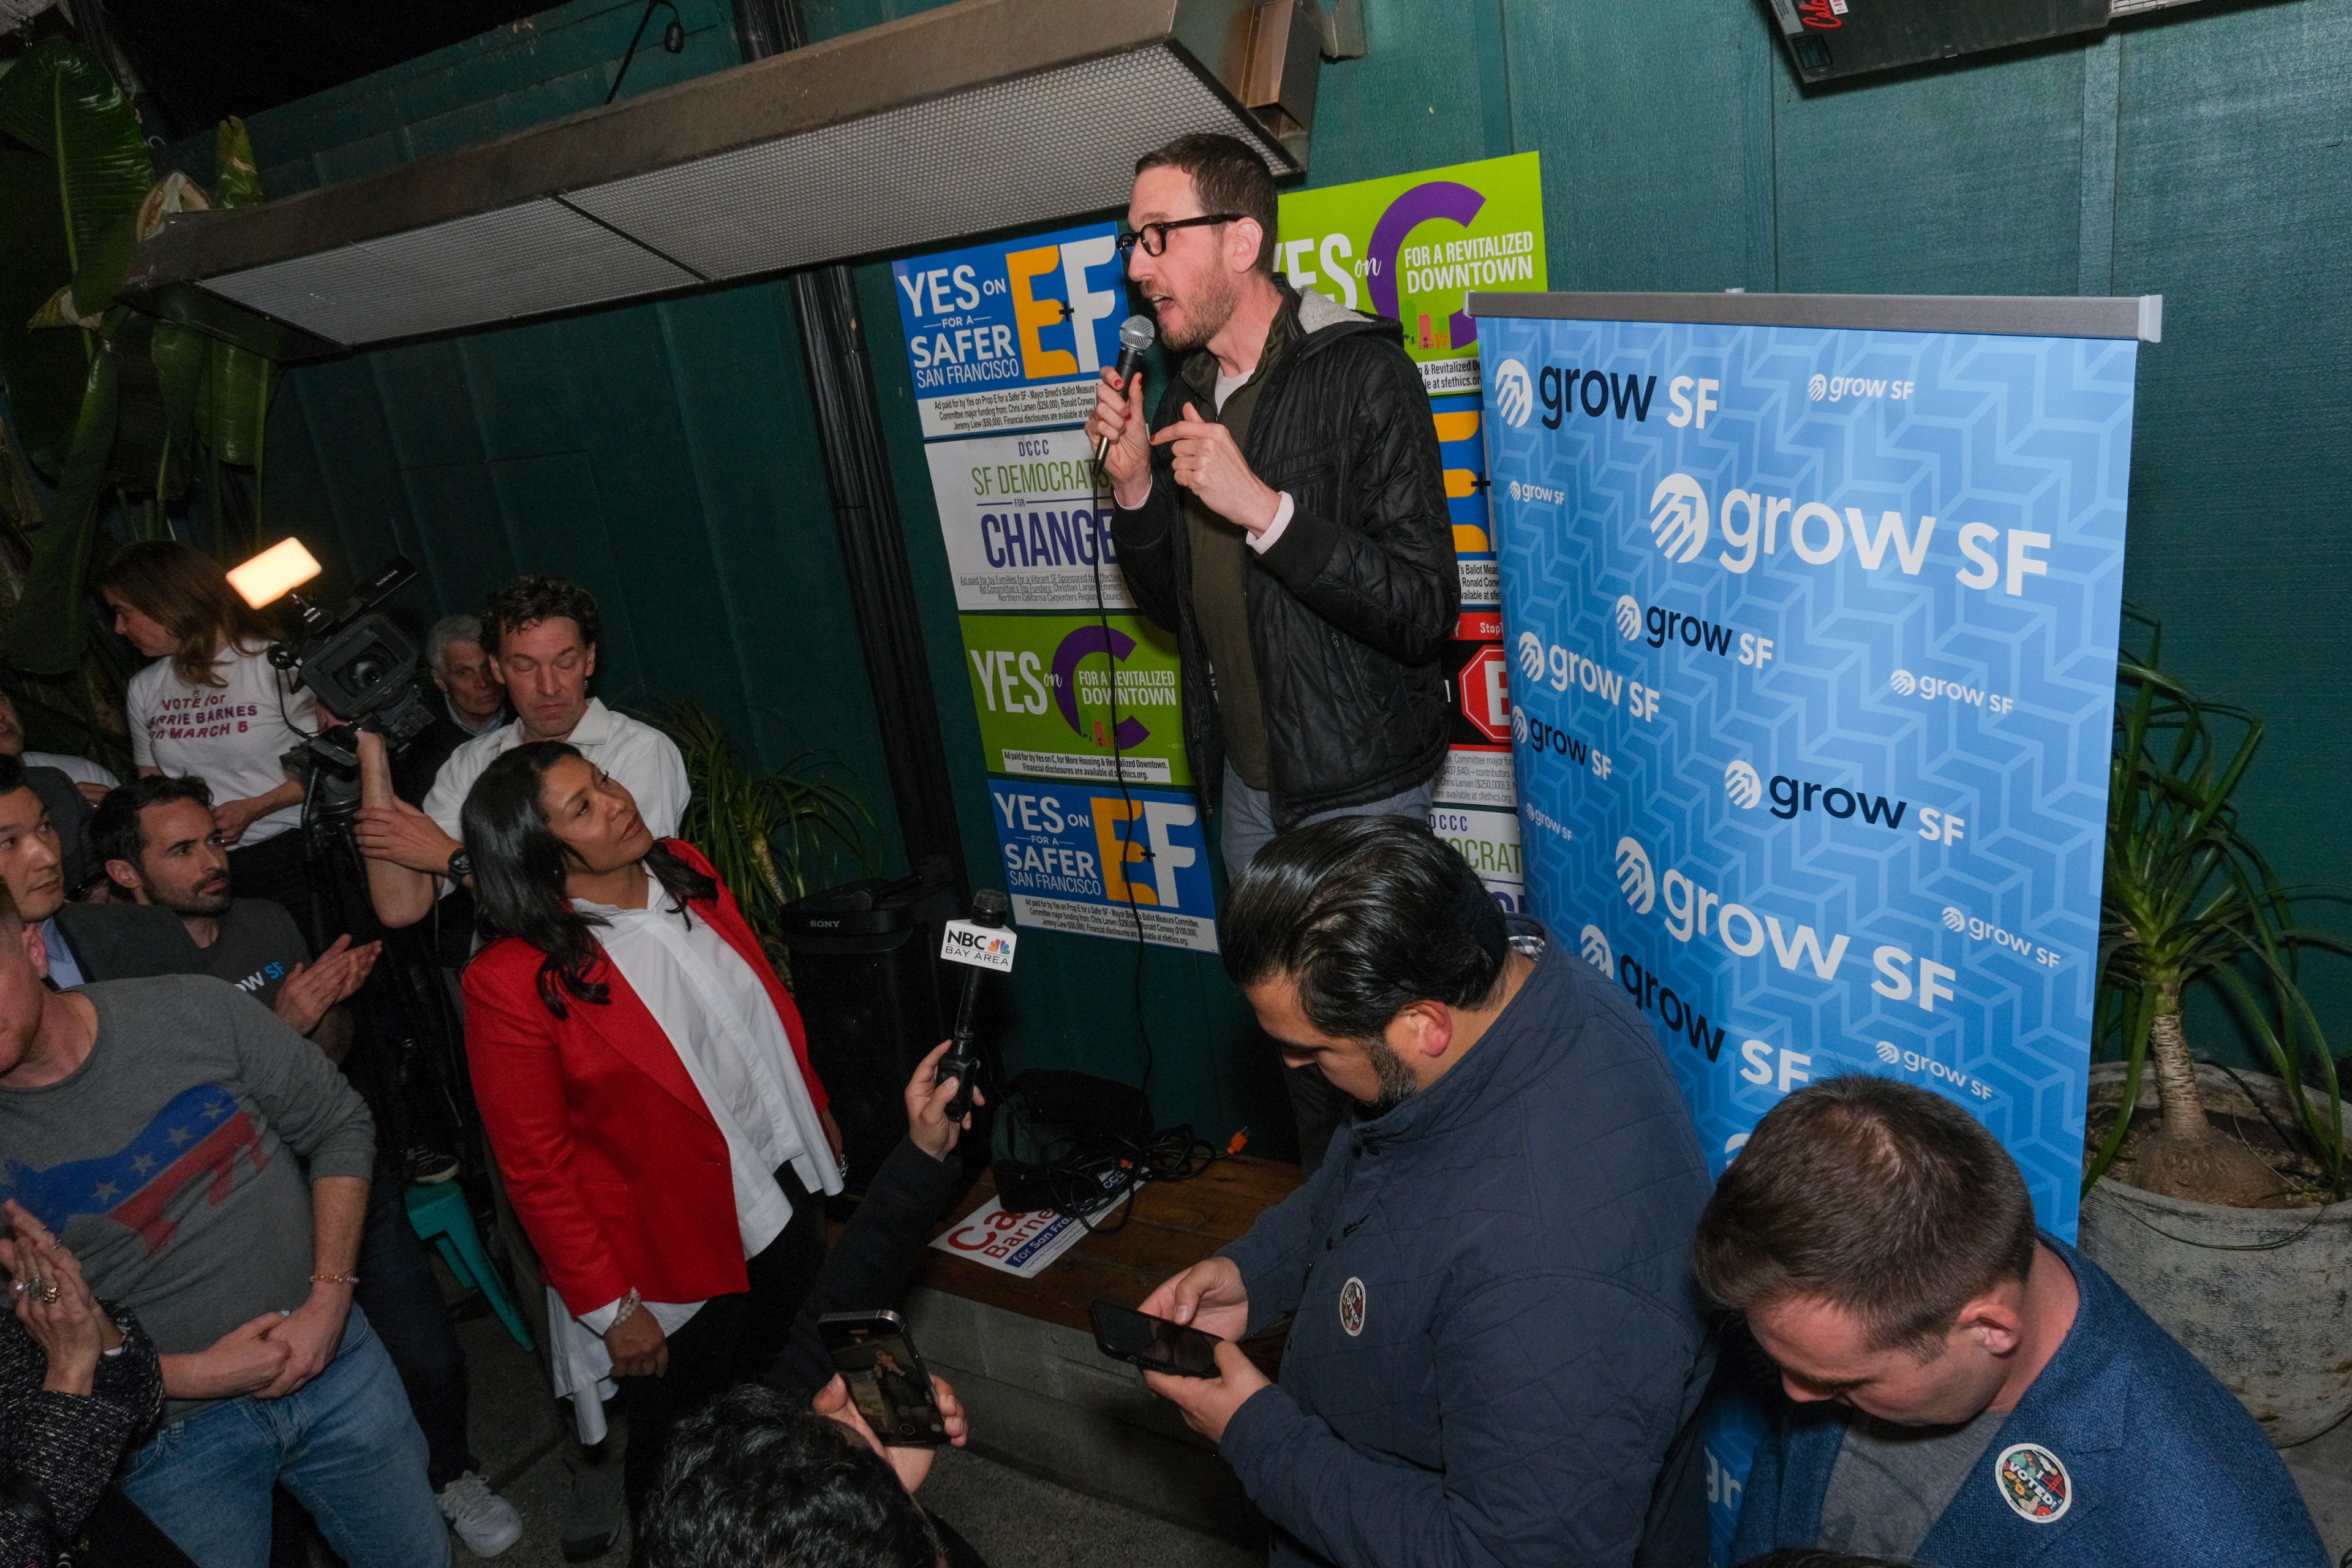 State Senator Scott Wiener speaks into a microphone at a campaign event with onlookers and cameras. Banners read &quot;Grow SF.&quot;